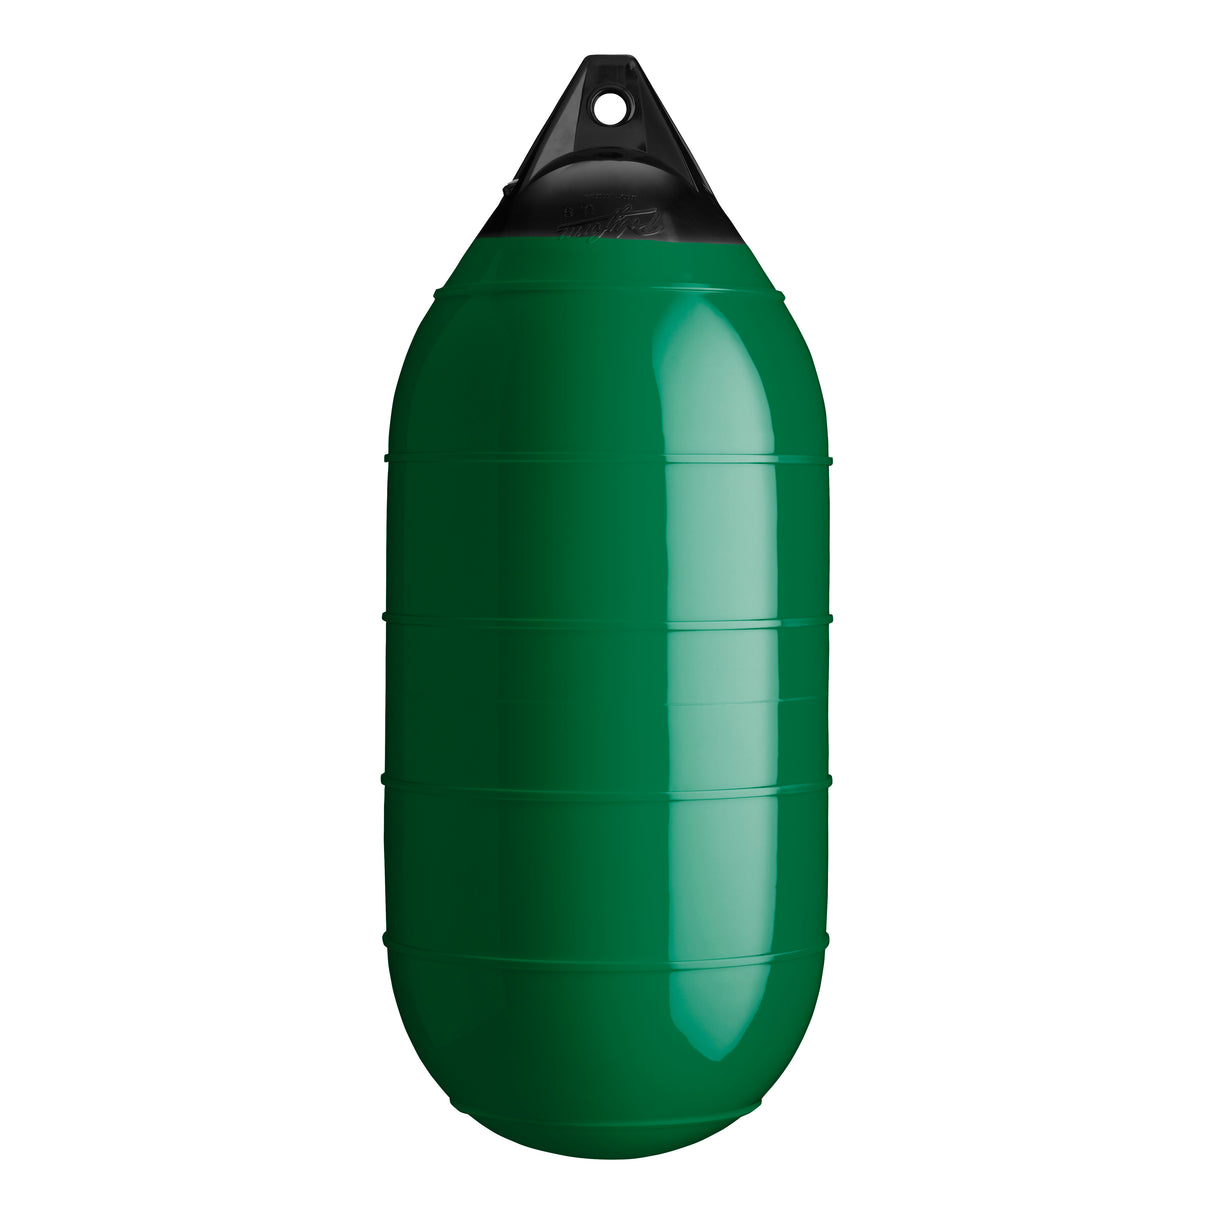 Forest Green low drag buoy with Black-Top, Polyform LD-4 